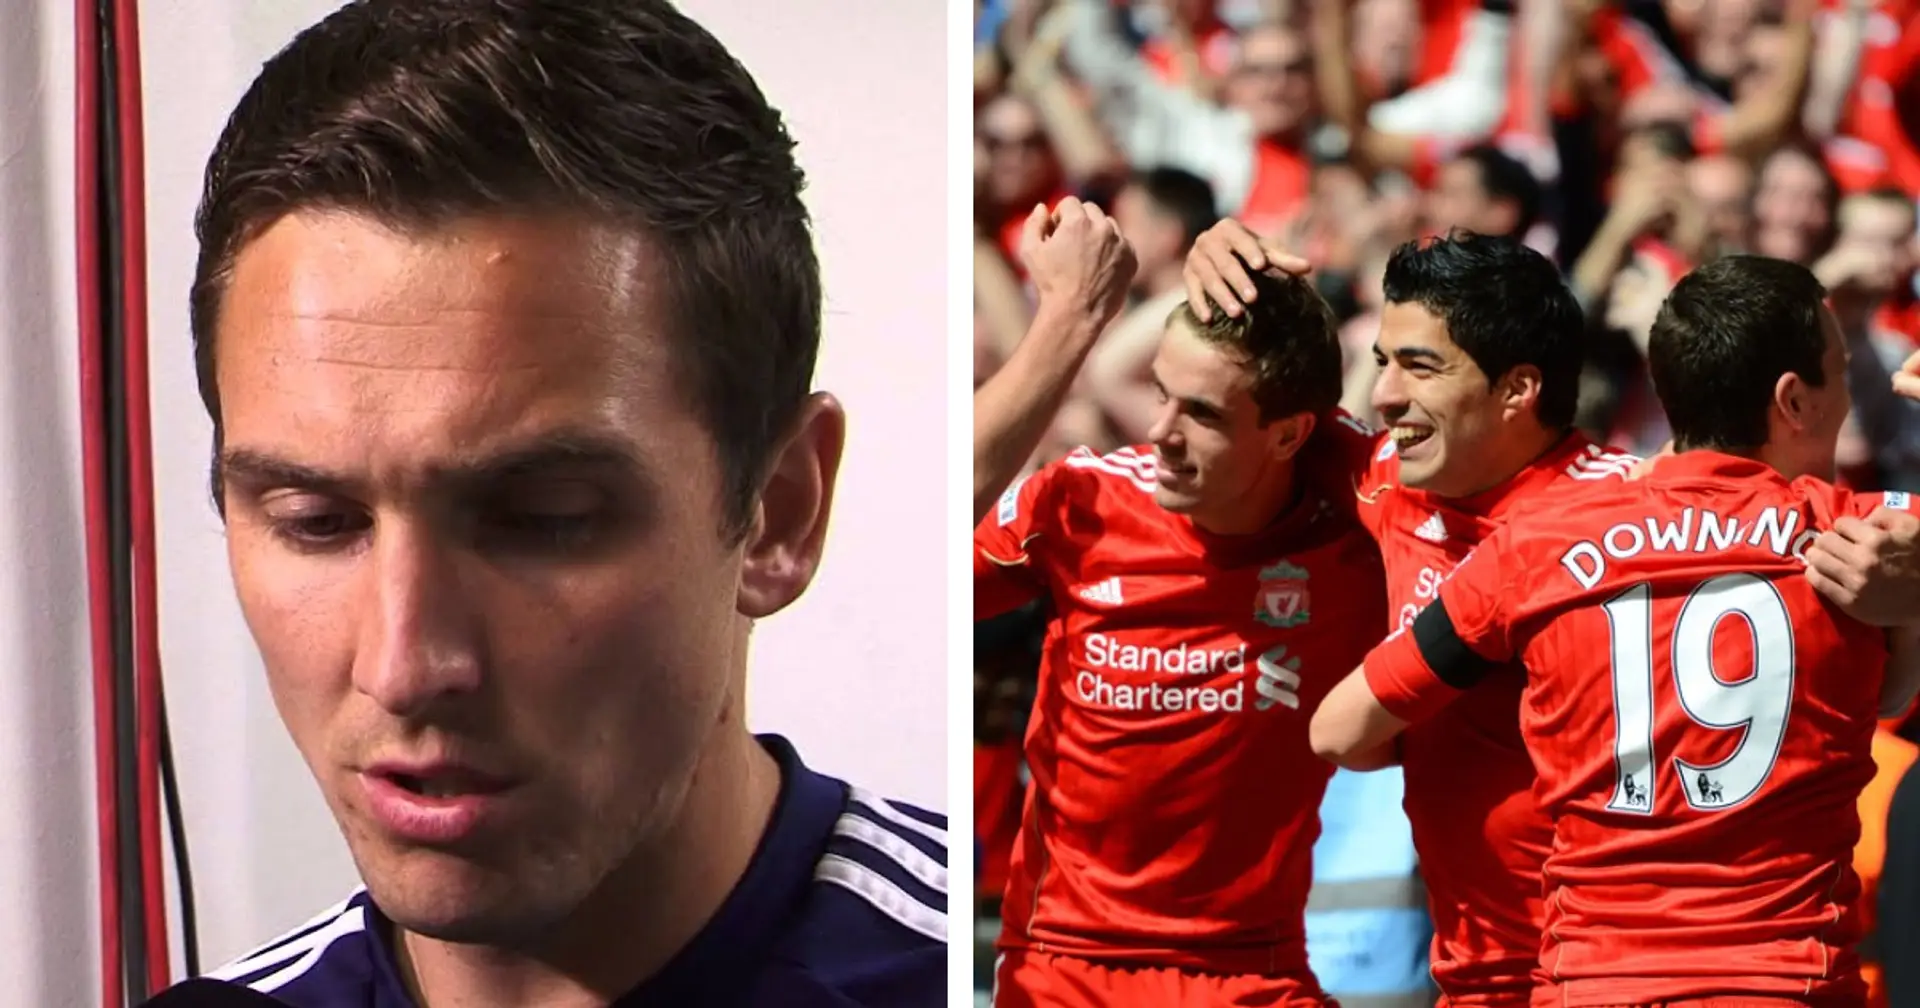 'He's got world class players around him getting left out': Downing heaps praise on ex-teammate Henderson